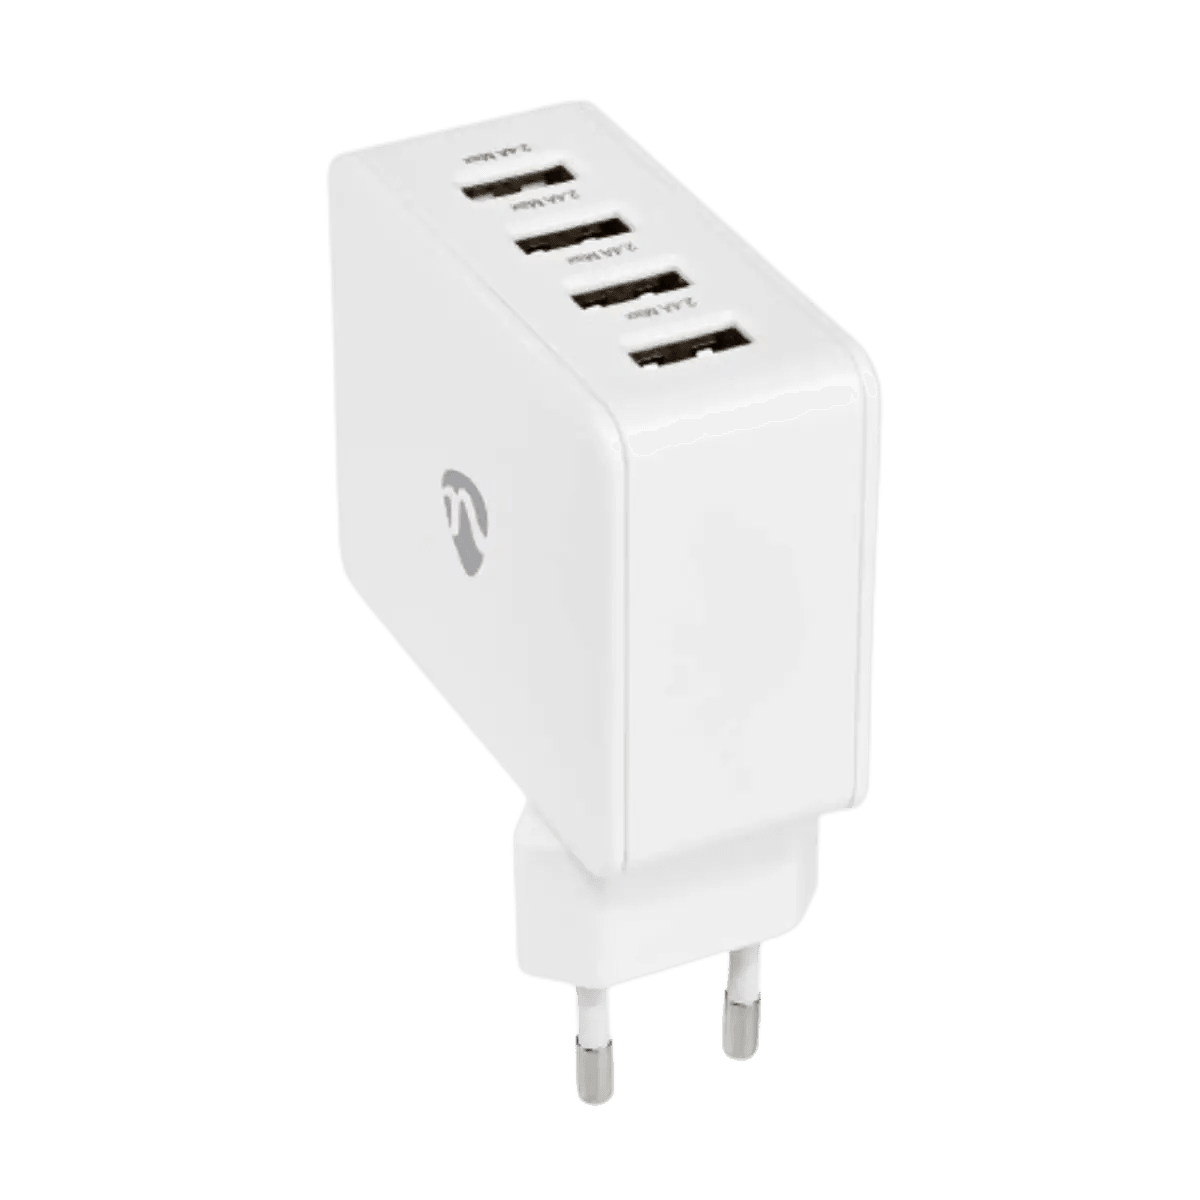 Mini chargeur allume-cigare - 2 ports USB Charge rapide 3,0 A/V